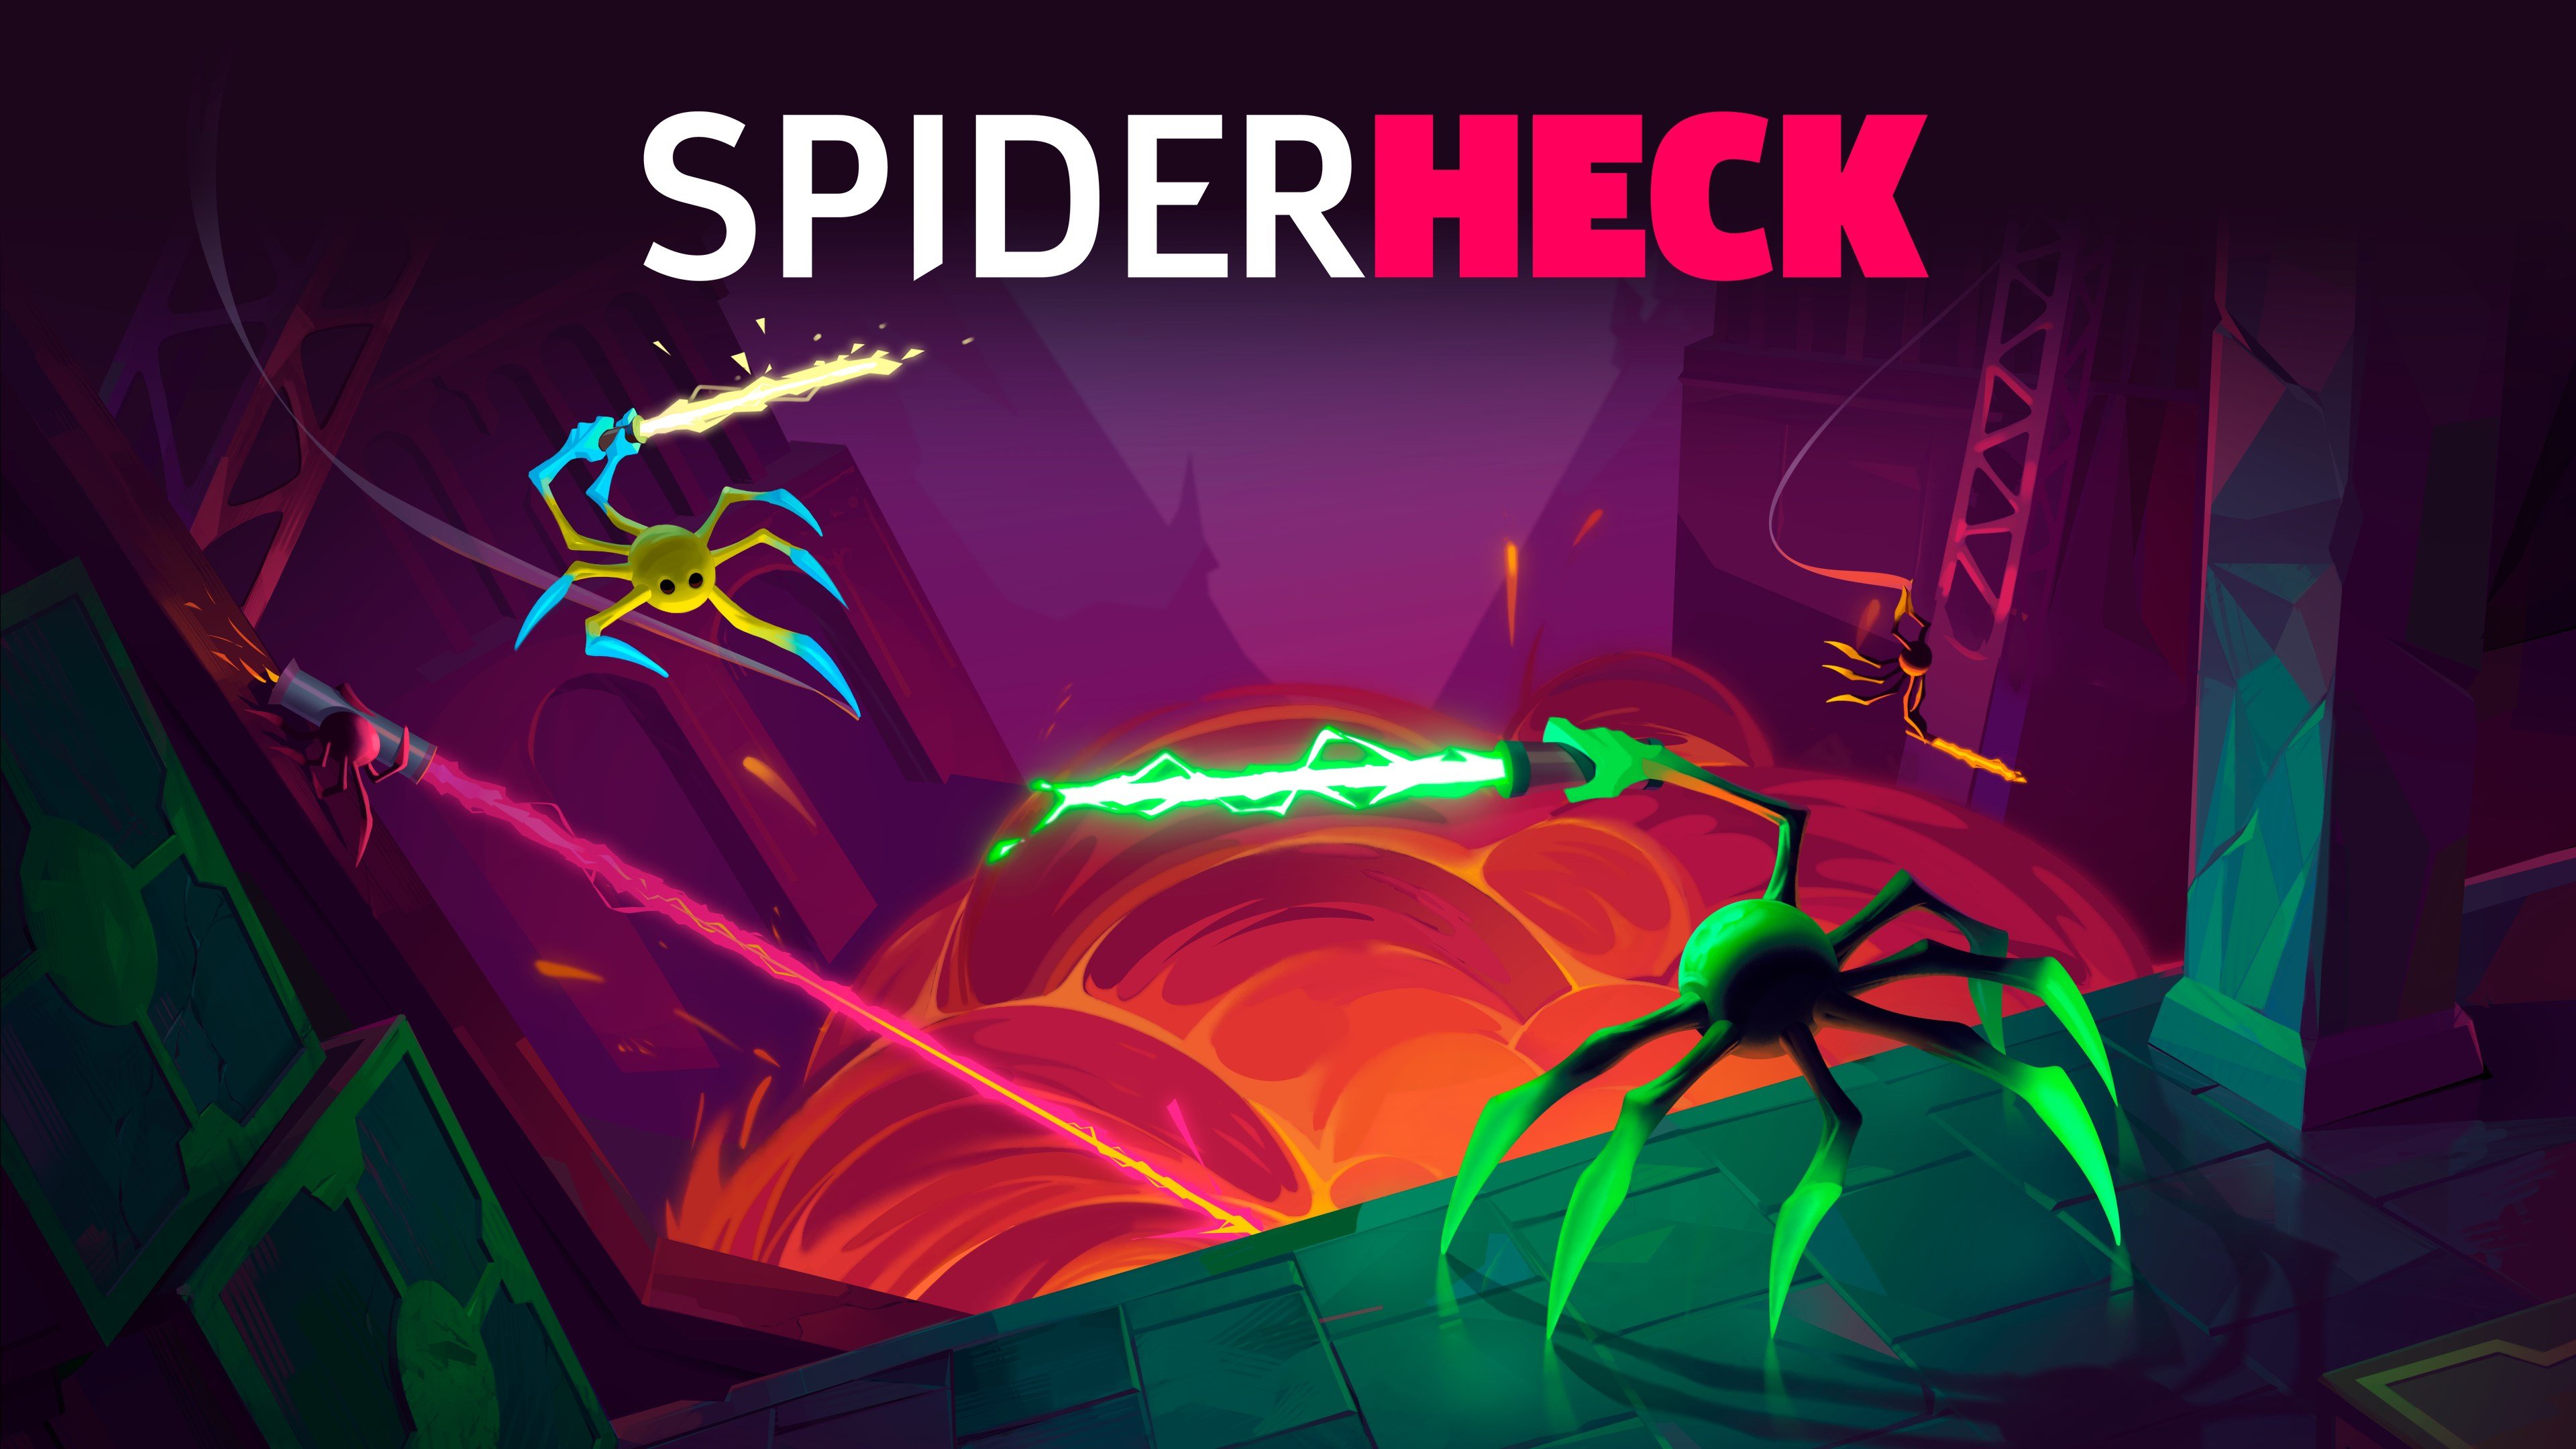 SpiderHeck cover image